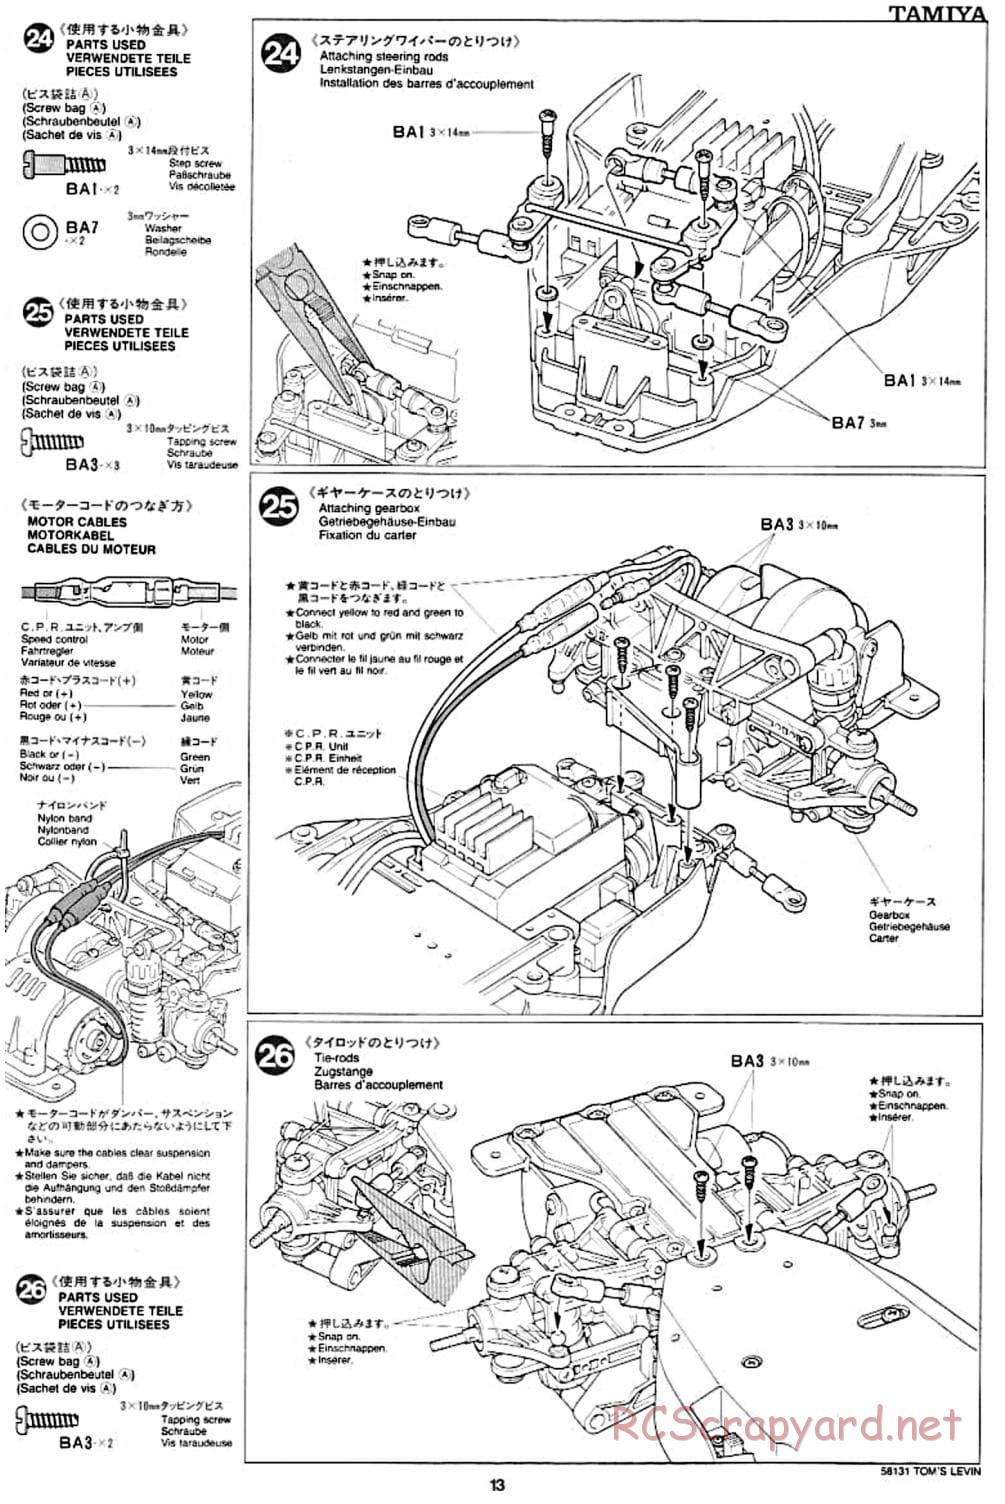 Tamiya - Toyota Tom's Levin - FF-01 Chassis - Manual - Page 13